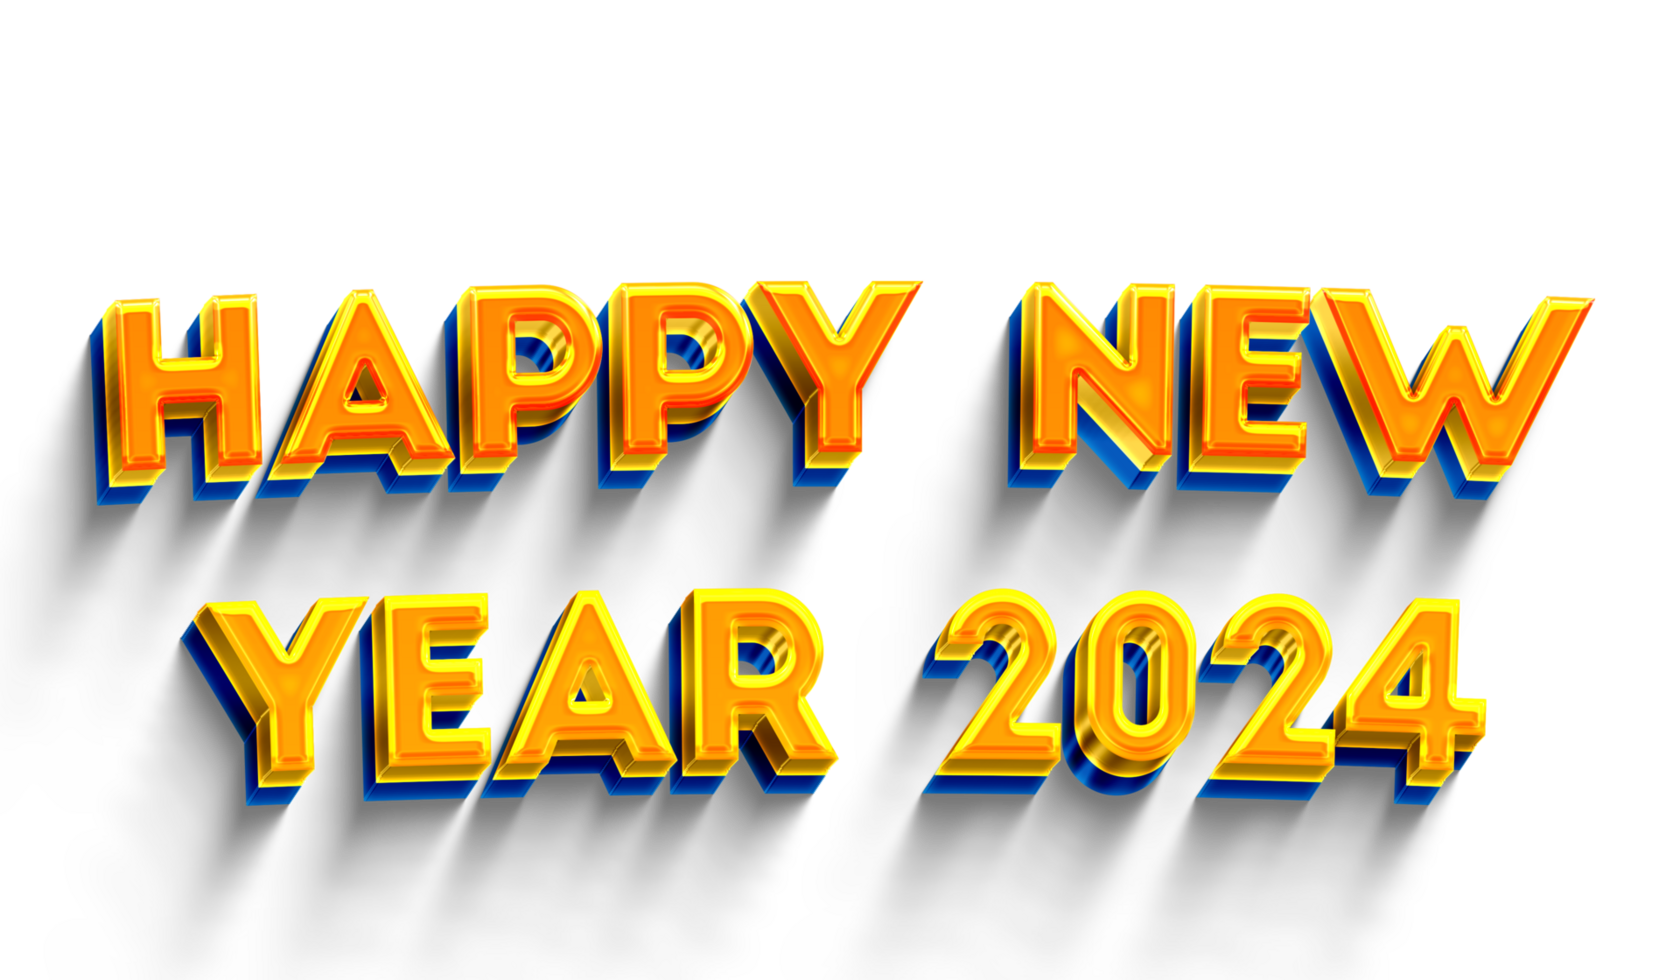 Happy New Year 2024 Festive Numbers and Celebration on a Clean White Background, Creating a Cheerful Holiday Illustration. png